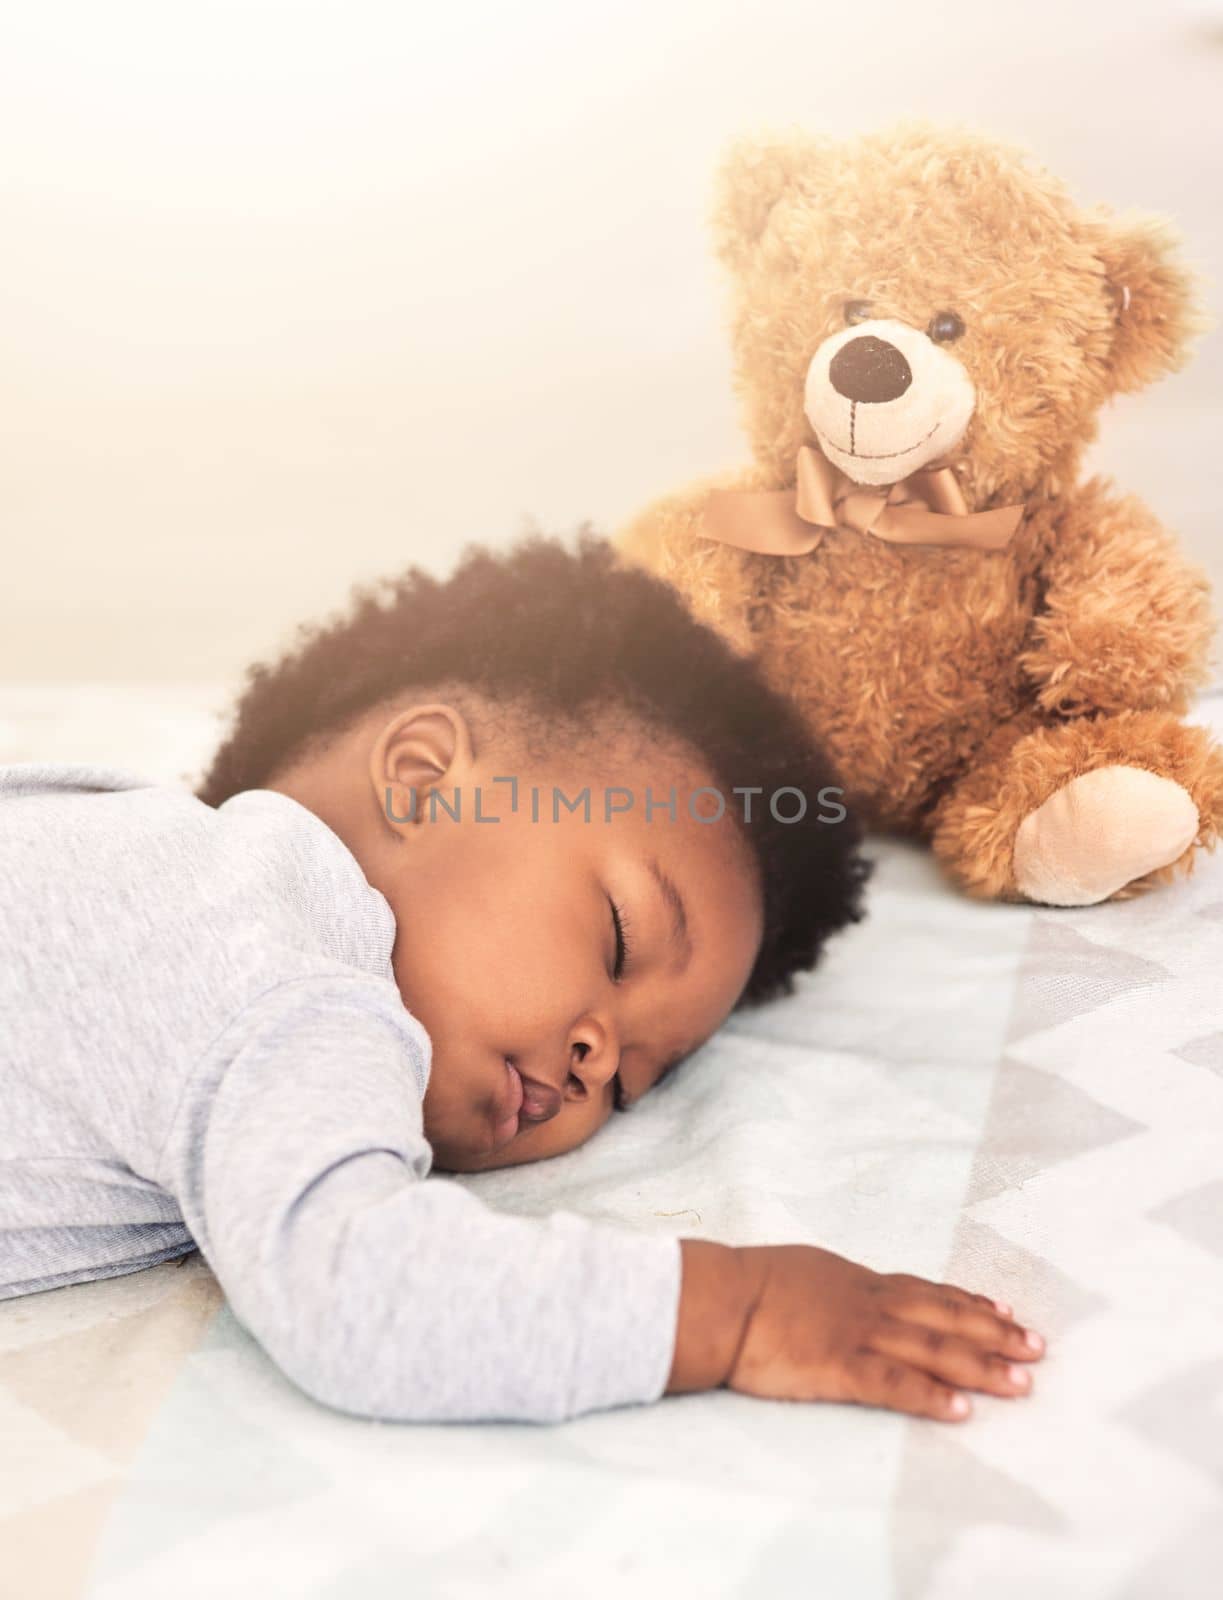 Teddy watches over him while he sleeps. a little baby boy sleeping on a bed. by YuriArcurs